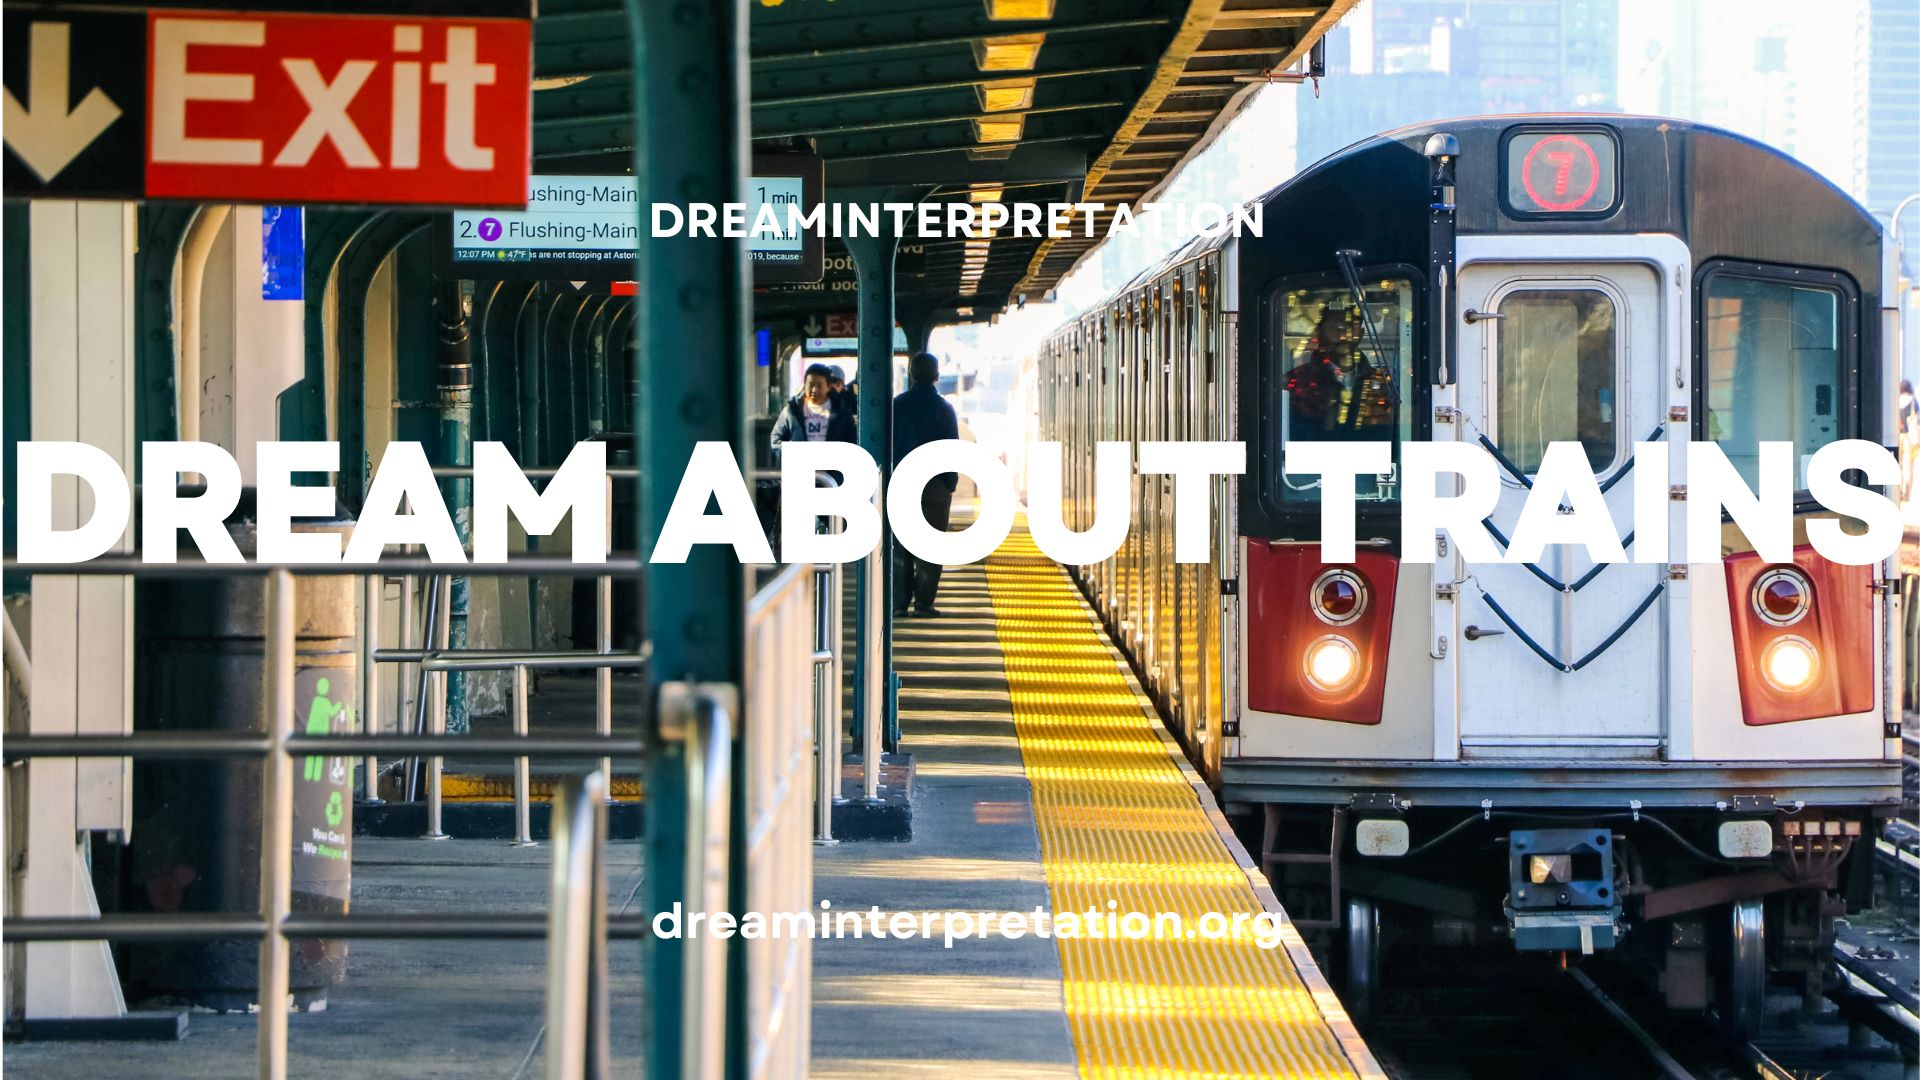 What does it mean when you dream about travelling by train?